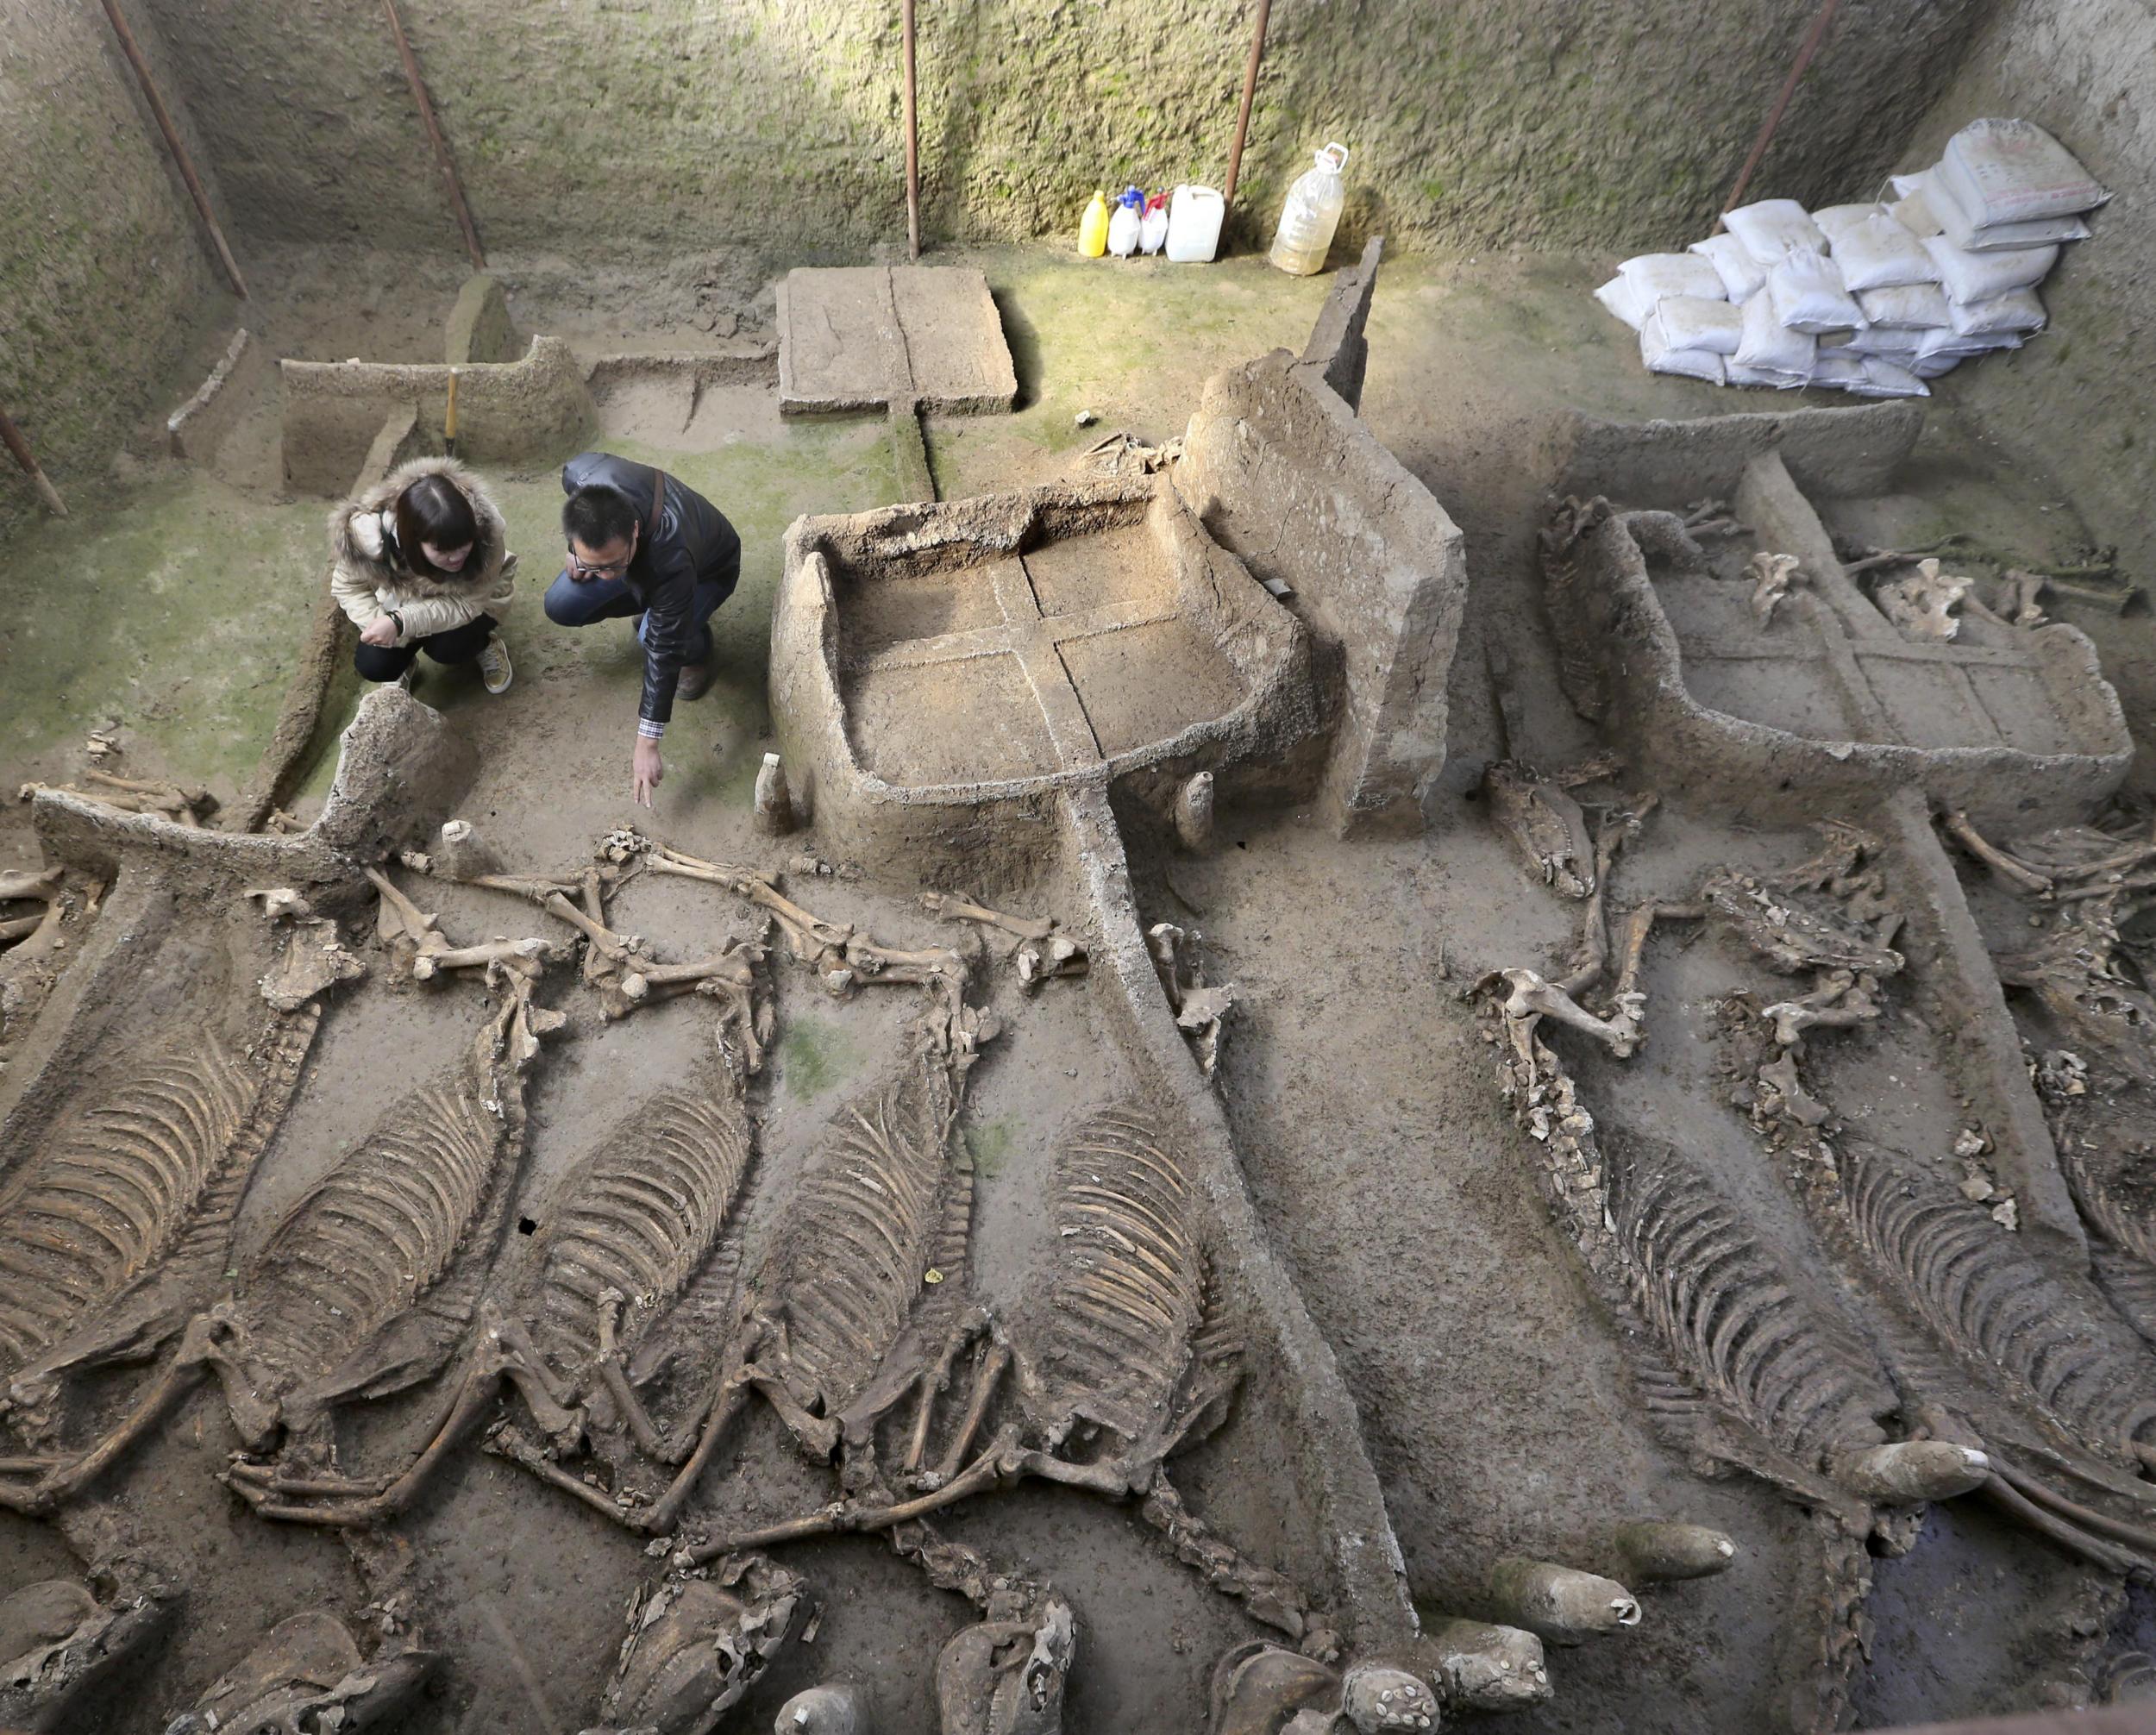 The tomb of a Luhun nobleman and his family also contained the skeletons of 13 horses and six chariots